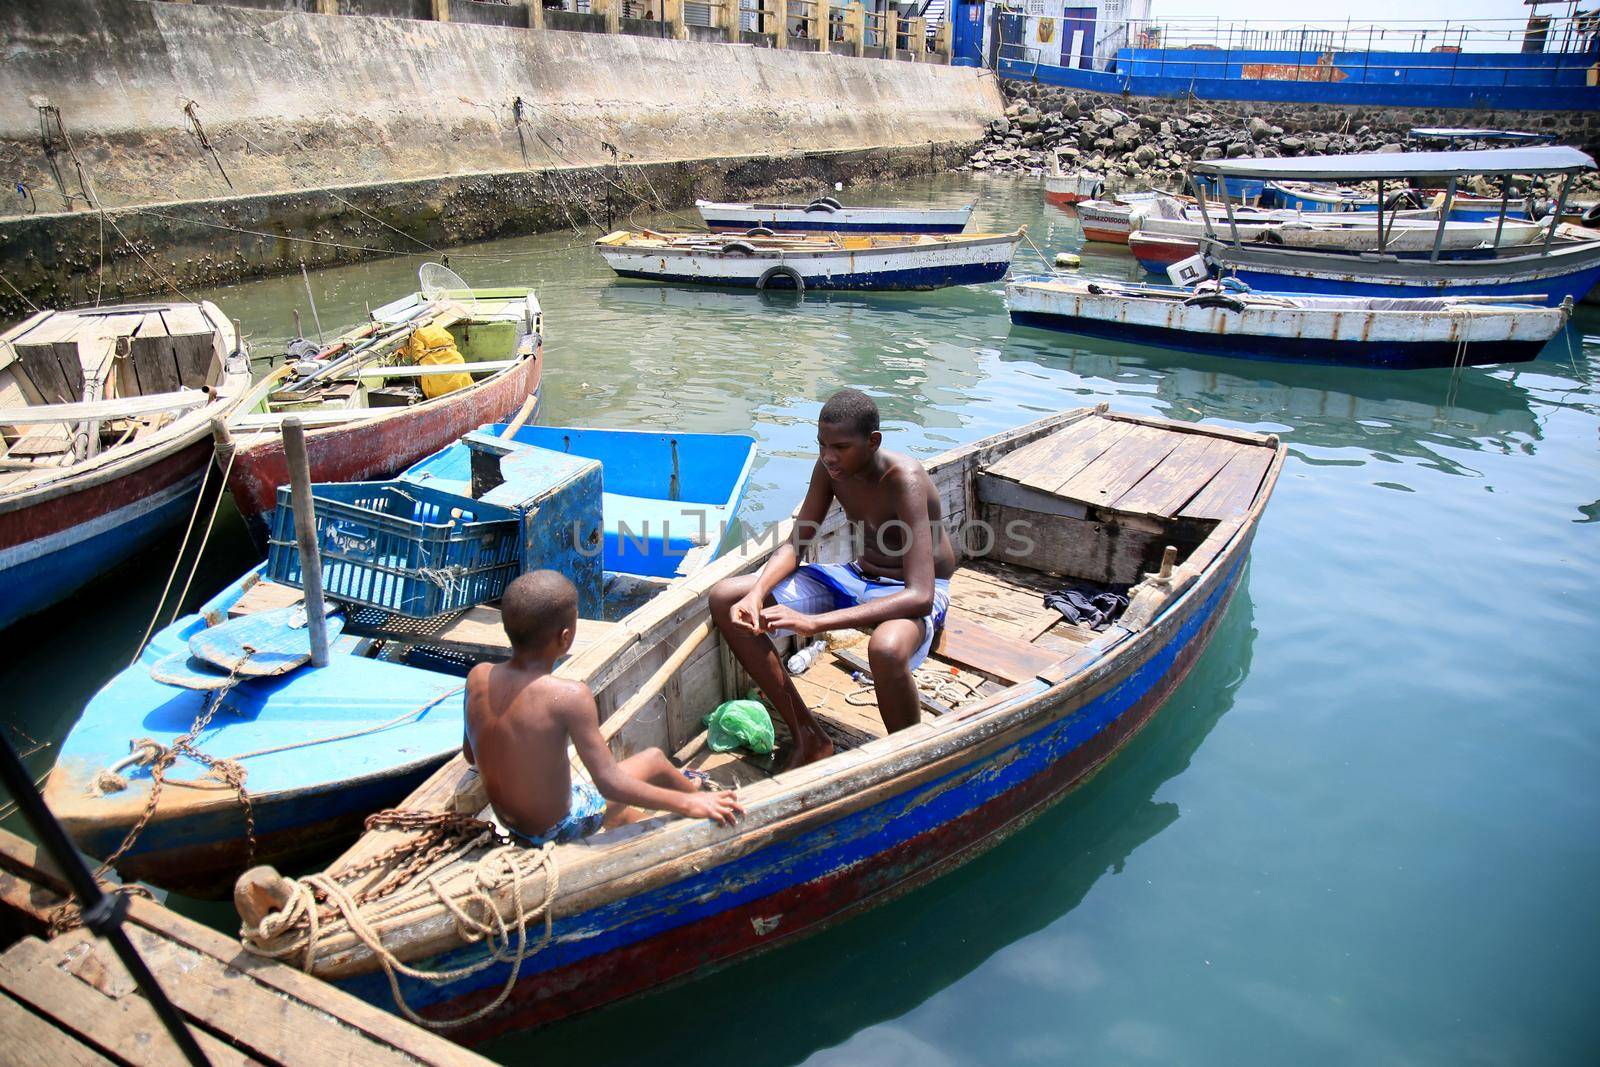 salvador, bahia, brazil - february 17, 2021: children playing next to boats in the port of Sao Joaquim fair in the city of Salvador.